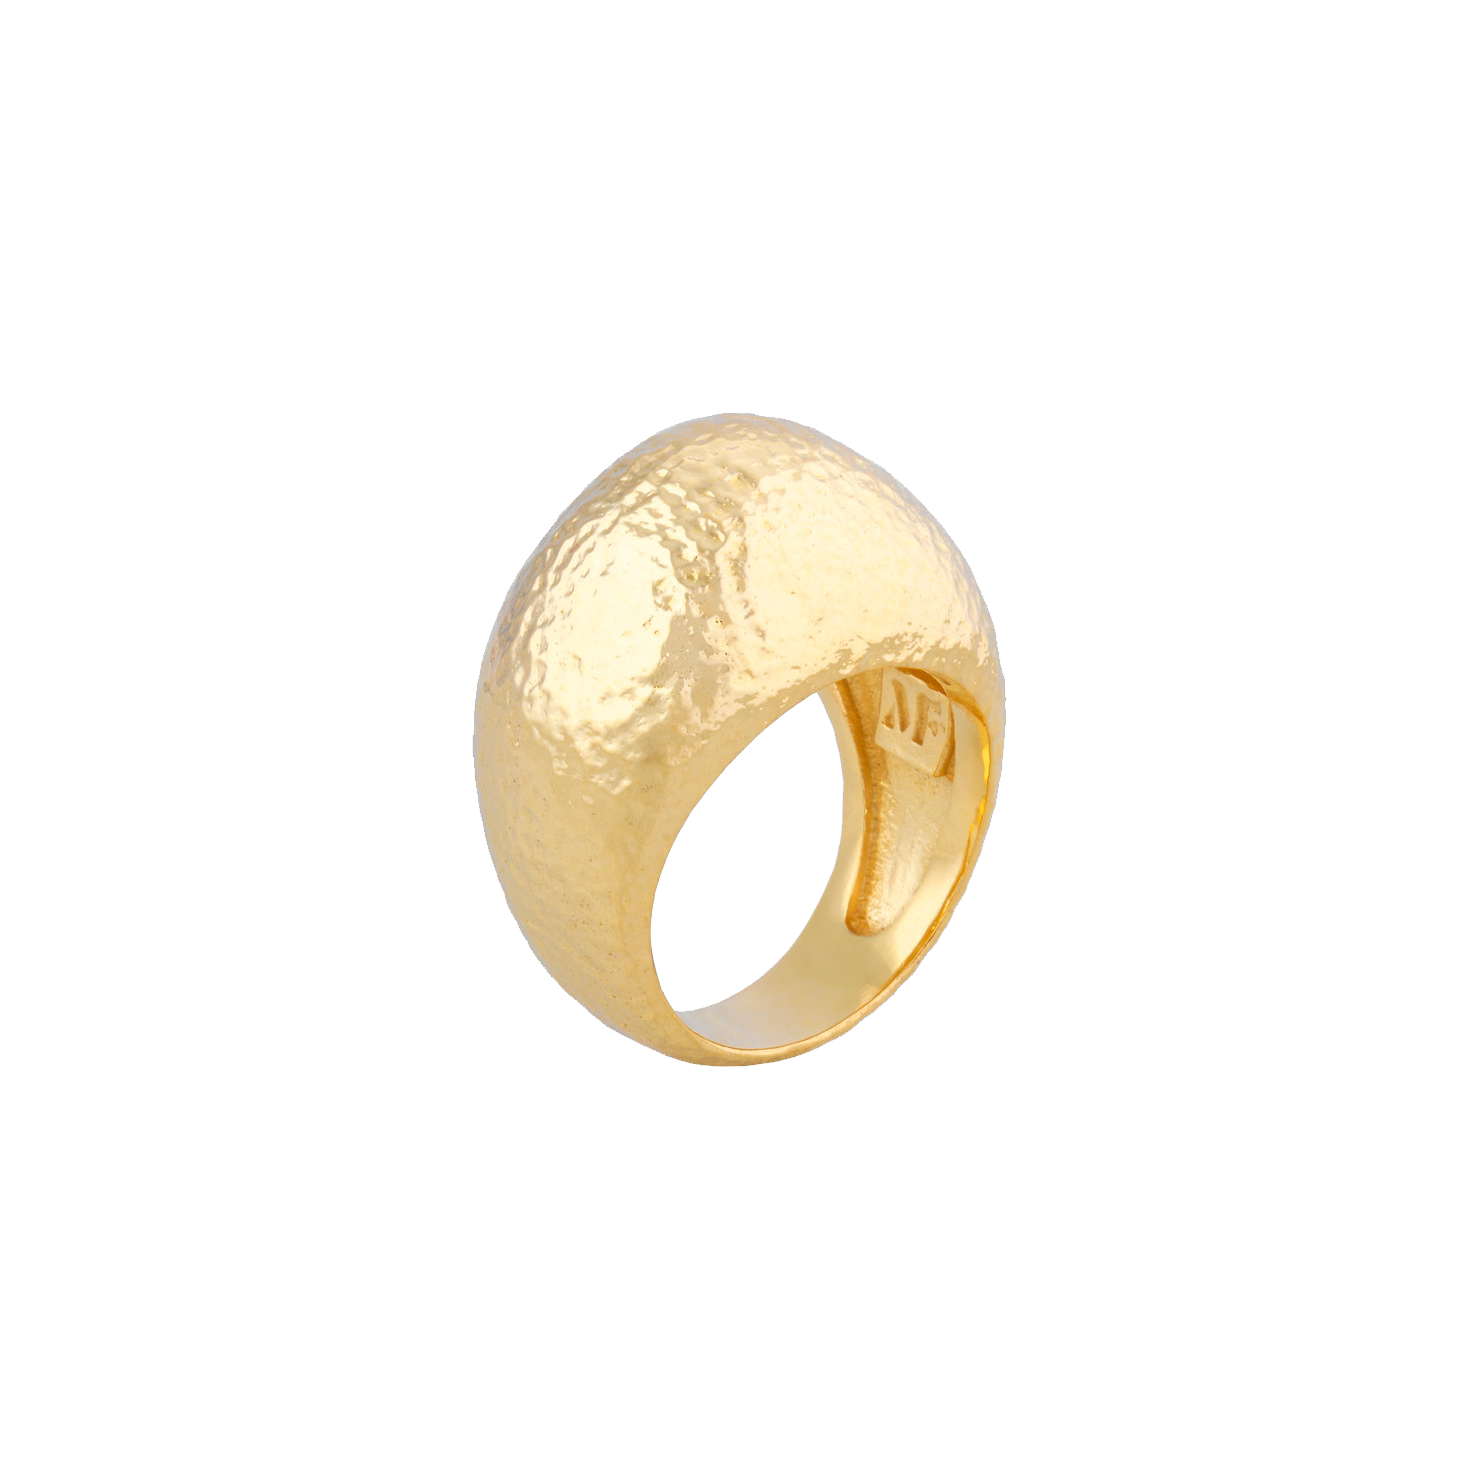 Large Allegory Ring